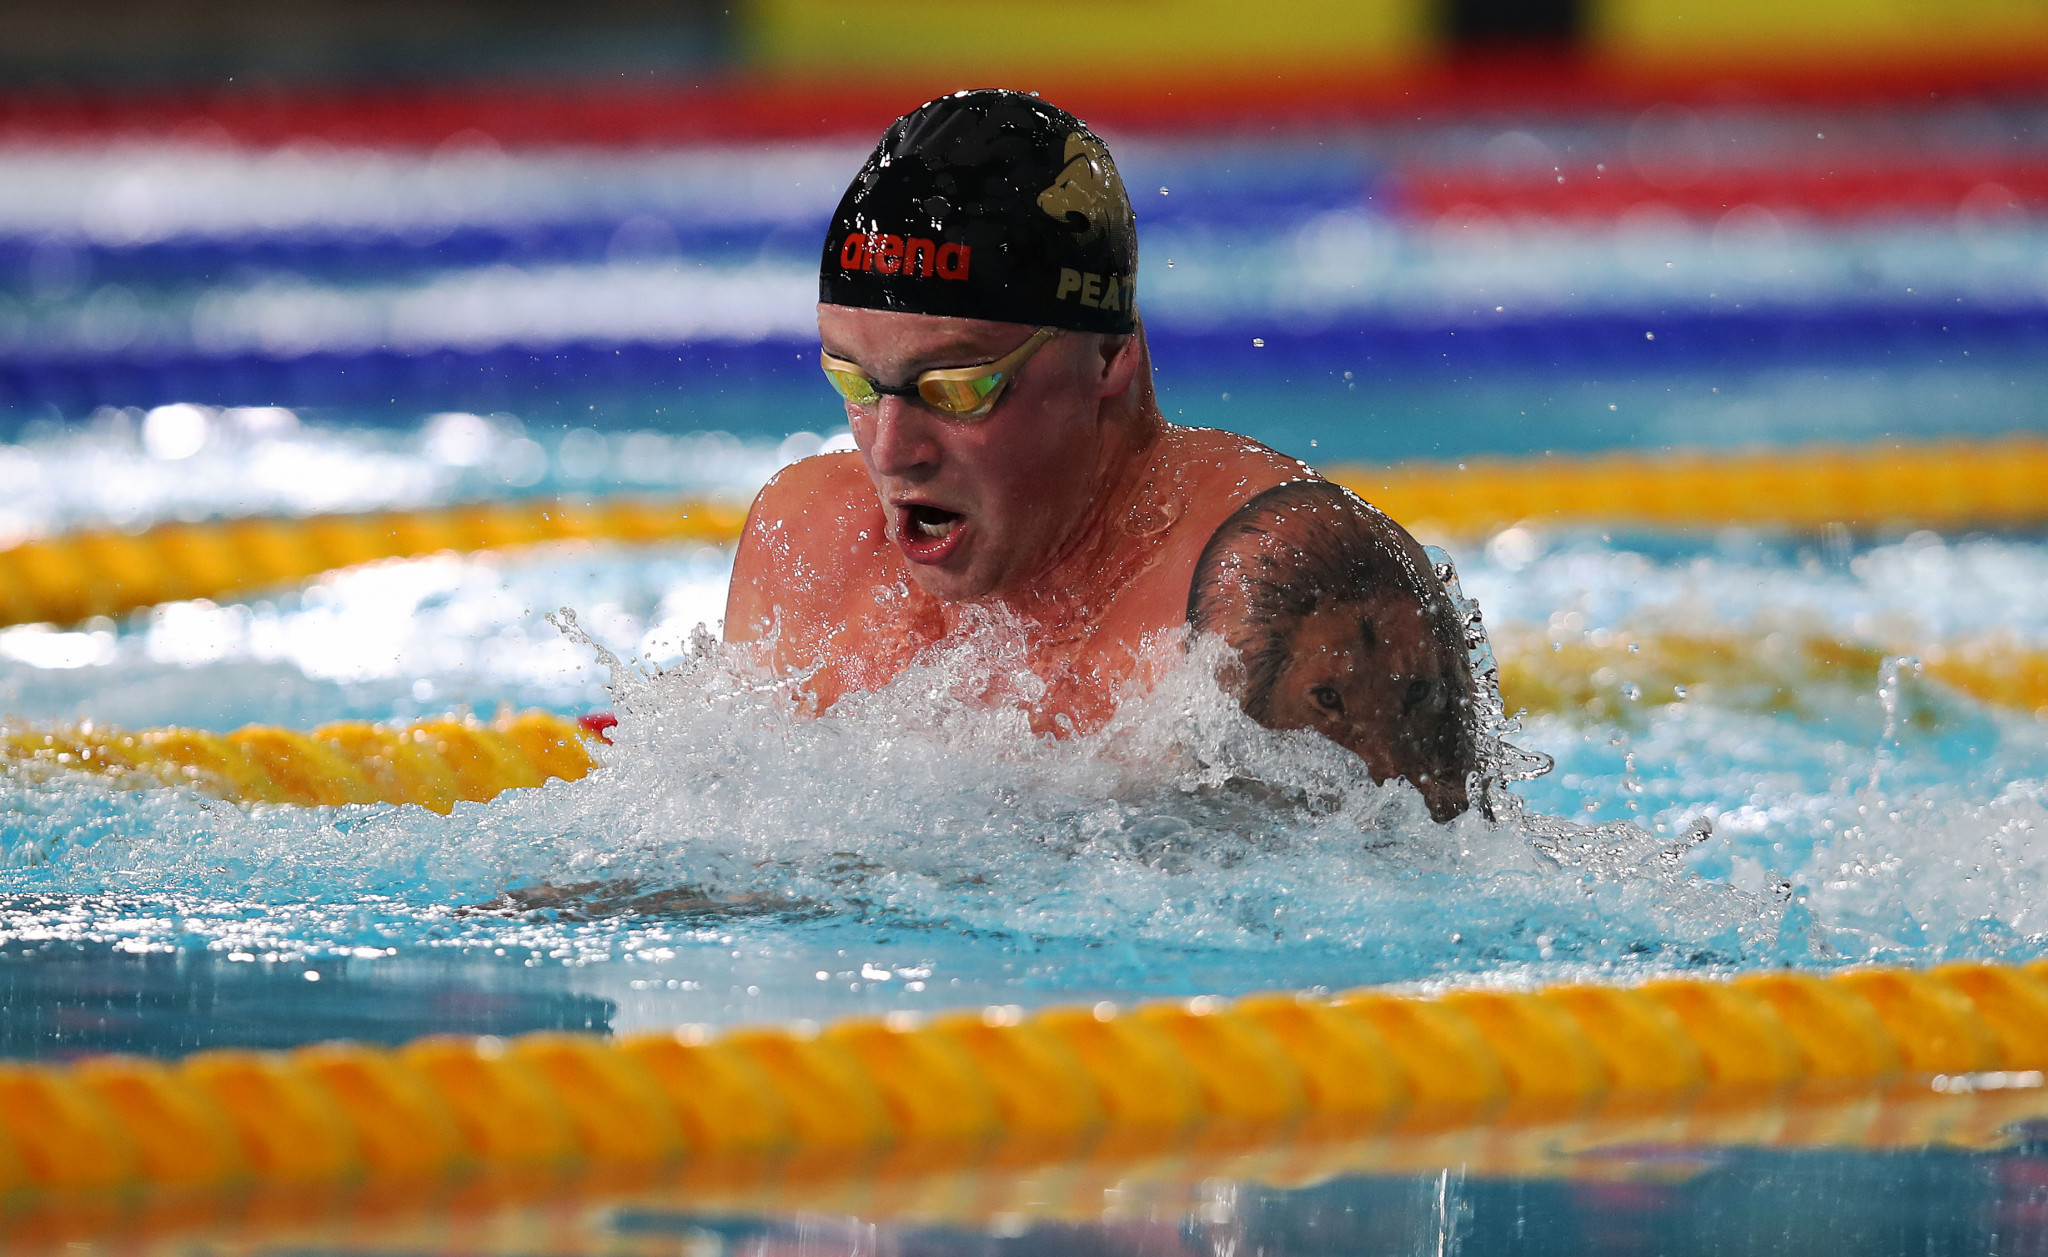 Olympic 100 metres breaststroke champion Adam Peaty is poised to compete in the inaugural International Swimming League, which has vast financial backing ©Getty Images